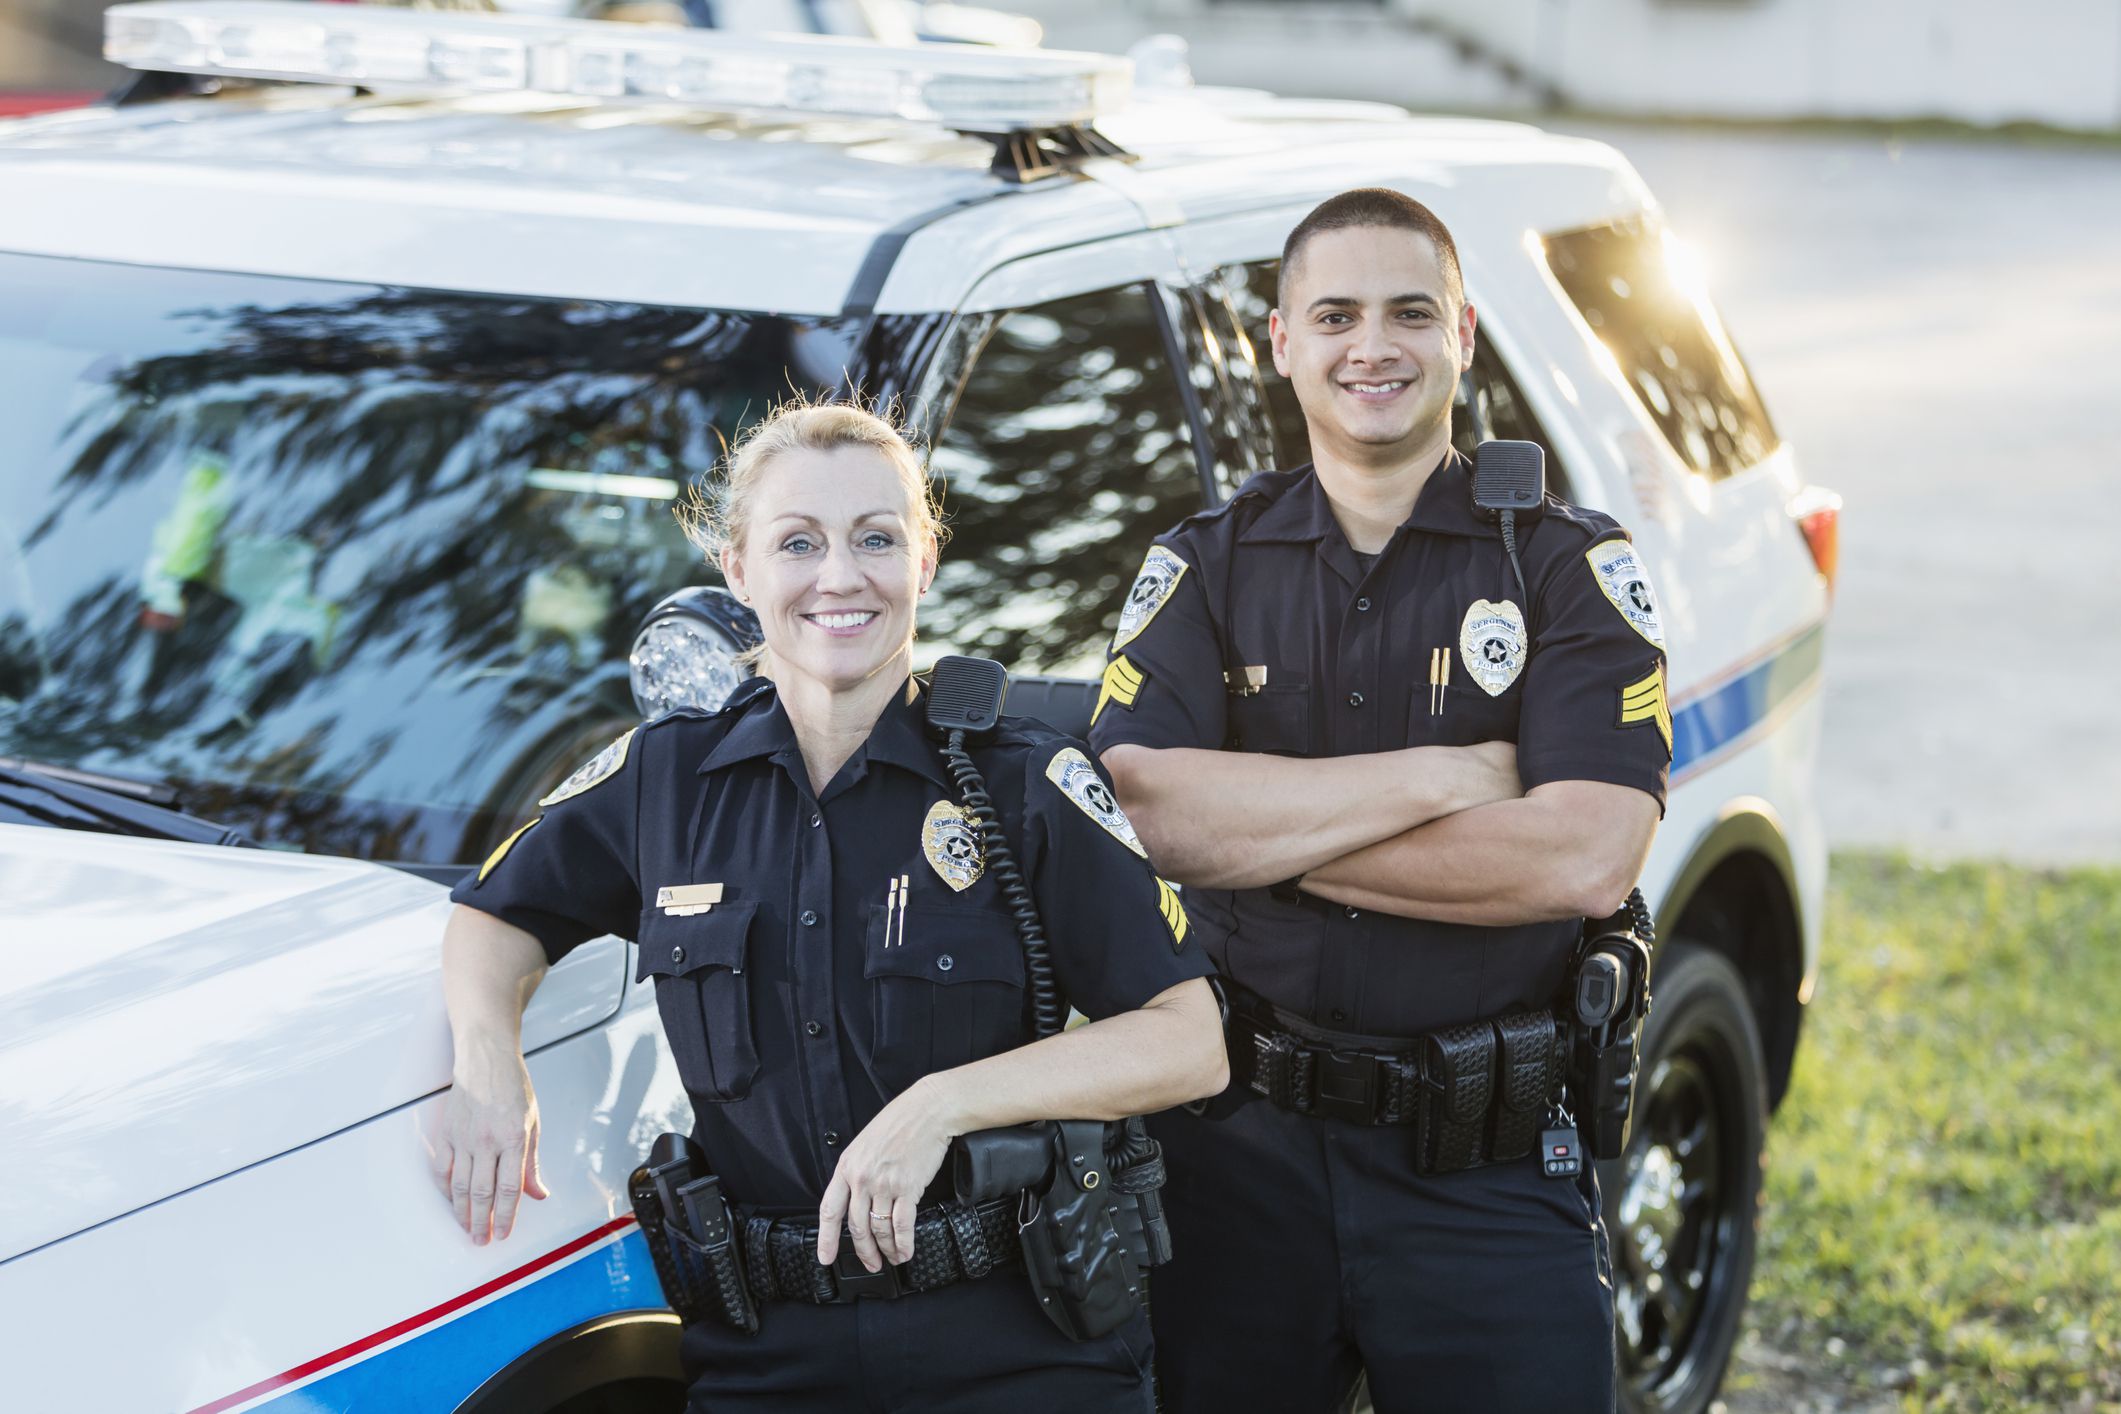 Learn What It Really Takes to Be a Police Officer